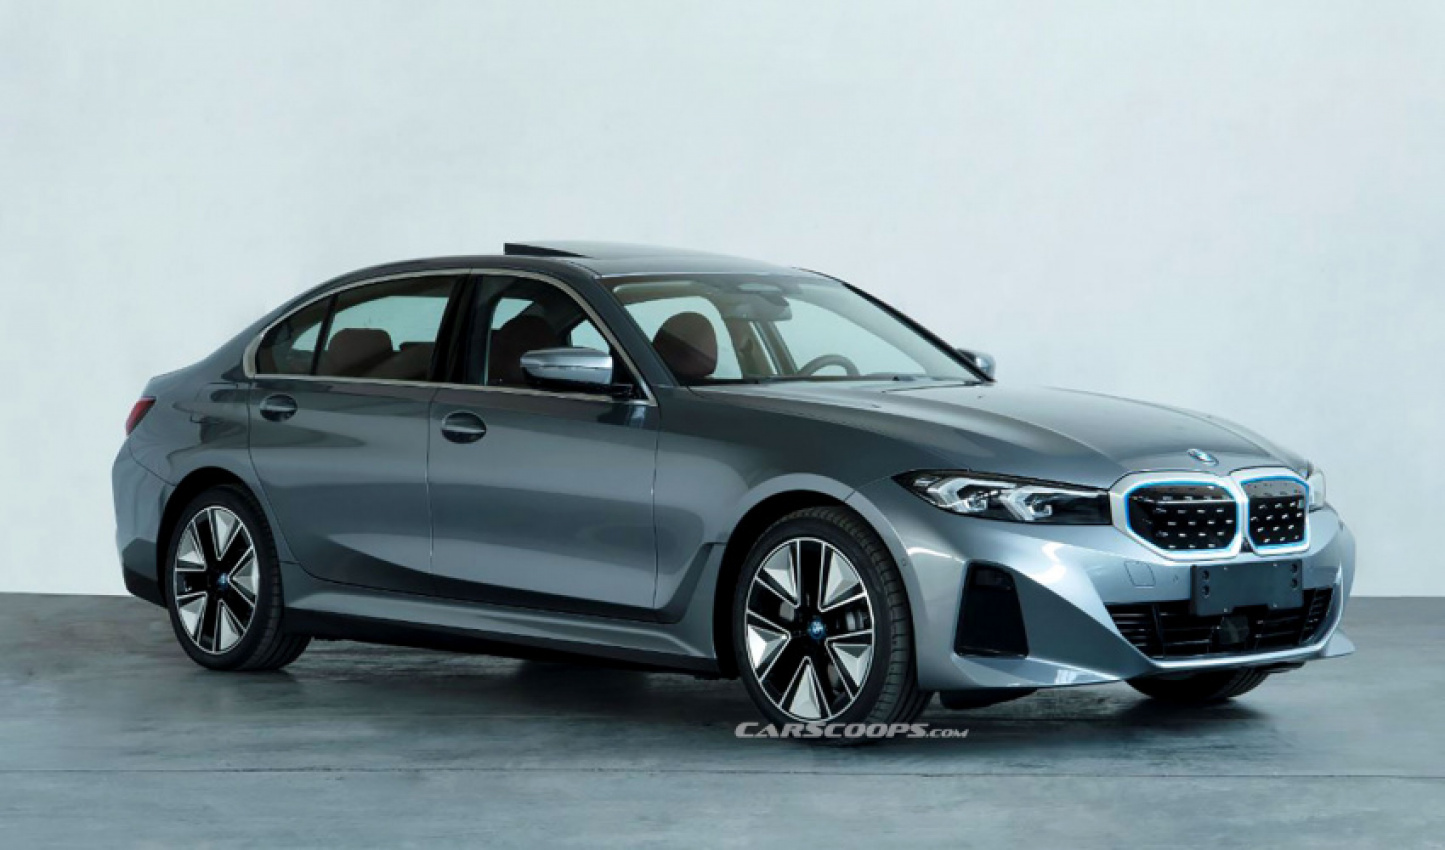 autos, bmw, cars, news, bmw 3 series, bmw 7-series, bmw x1, electric vehicles, hydrogen, mini, bmw confirms new generation of engines for 7-series, reveals plans for “digital vision vehicle”